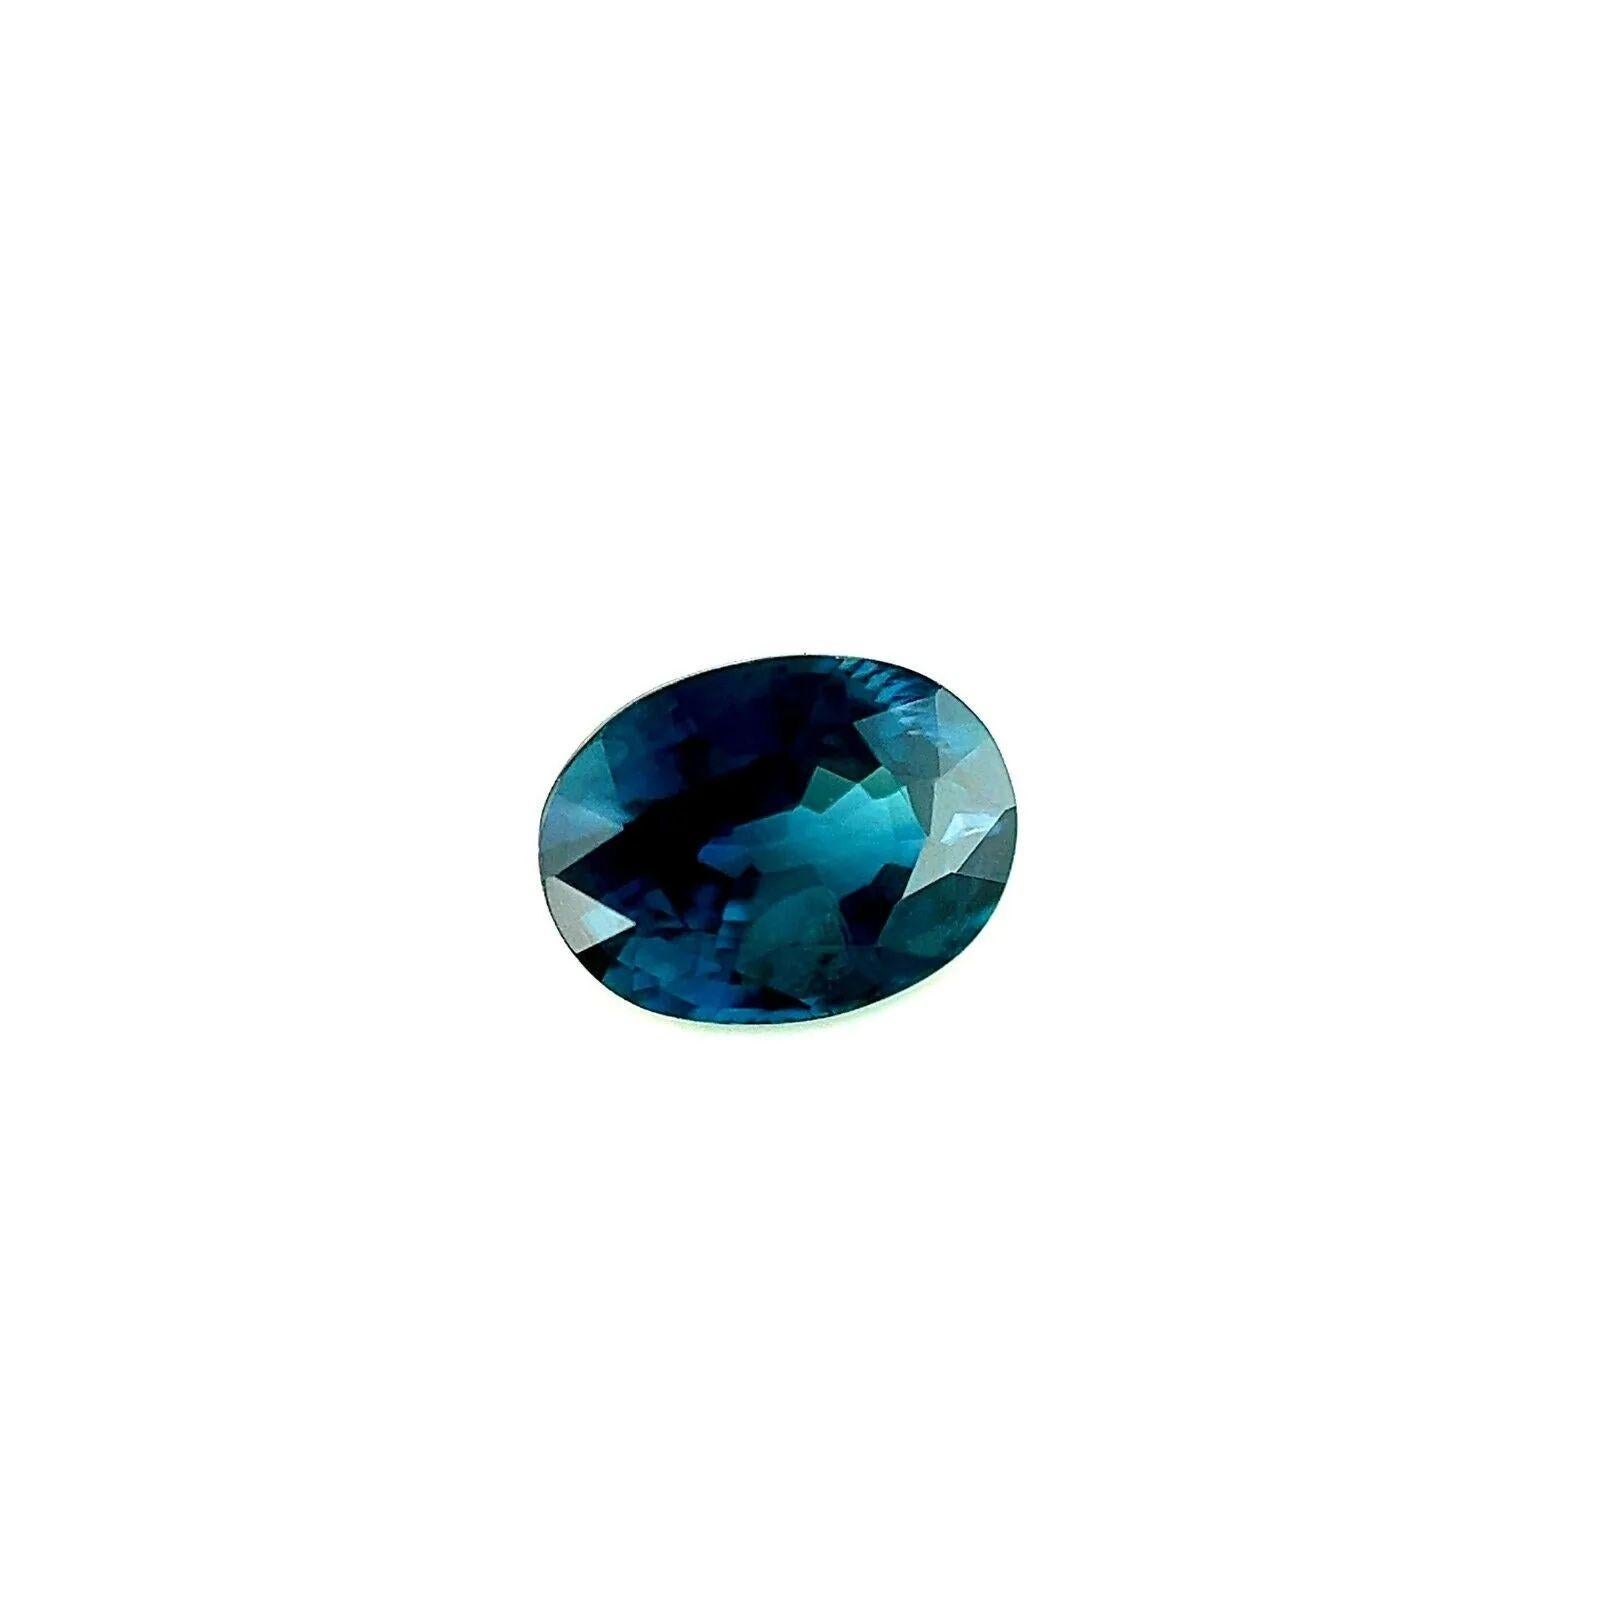 1.09ct AIG Certified Deep Rare Blue Sapphire Oval Cut 6.6x5mm Loose Gemstone

AIG Certified Deep Blue Sapphire Gemstone.
1.09 Carat sapphire with a beautiful deep blue colour.
Fully certified by AIG confirming stone as natural.
Also has very good